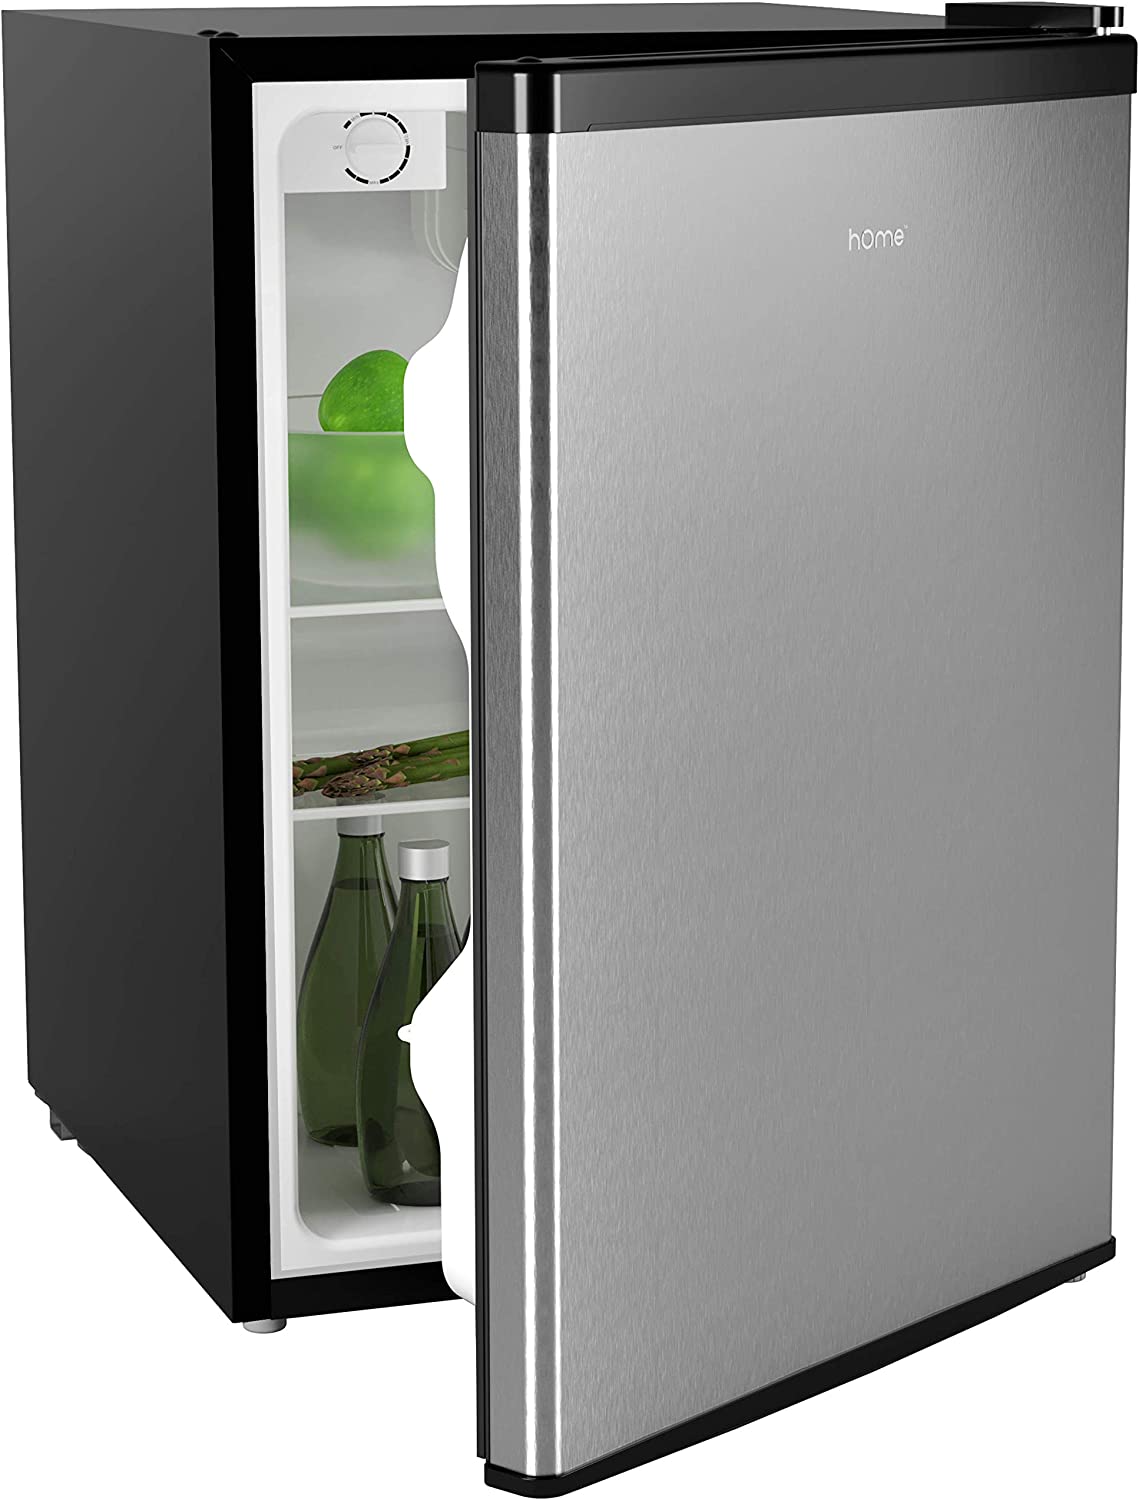 hOmeLabs Mini Fridge - 2.4 Cubic Feet Under Counter Refrigerator with Small Freezer - Drinks Healthy Snacks Beer Storage for Office, Dorm or Apartment